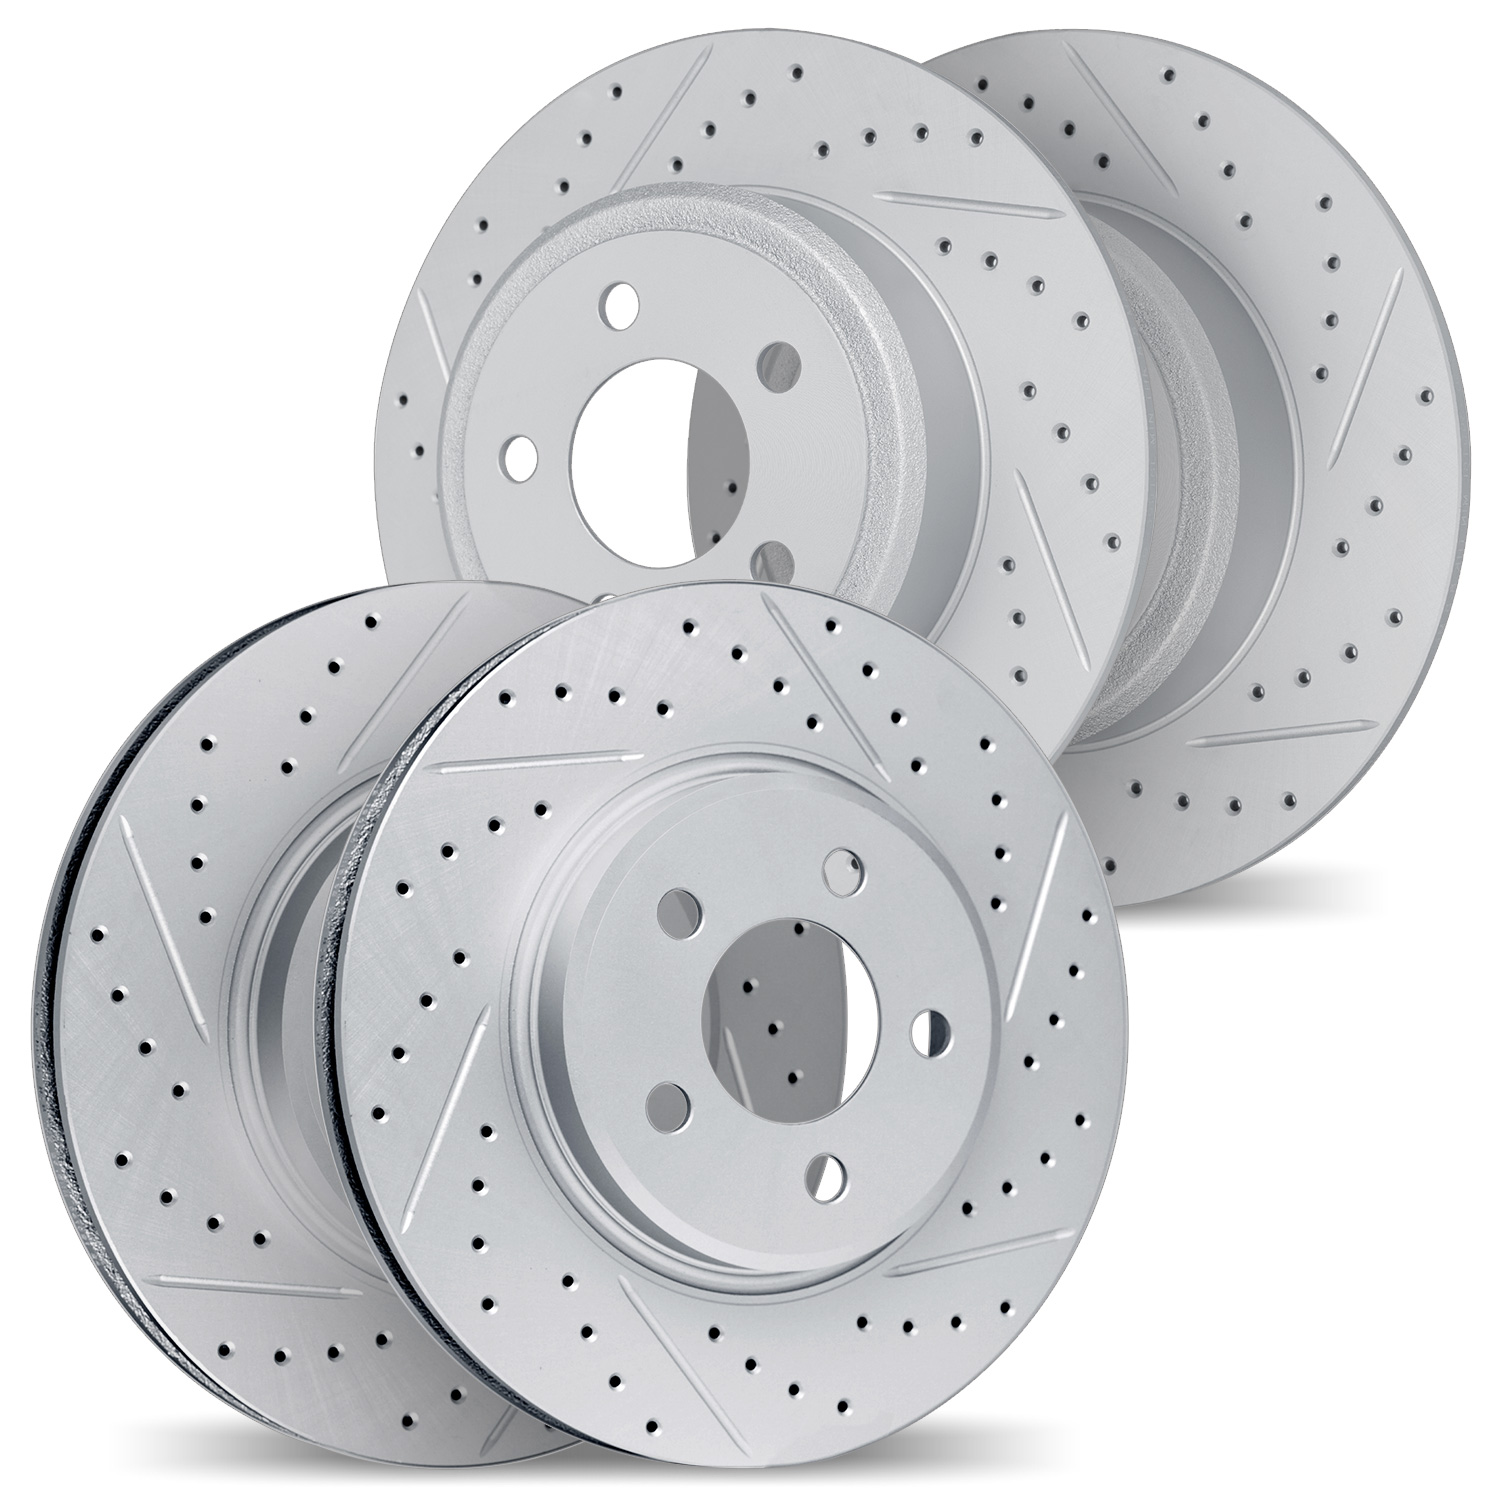 2004-80010 Geoperformance Drilled/Slotted Brake Rotors, Fits Select Ford/Lincoln/Mercury/Mazda, Position: Front and Rear